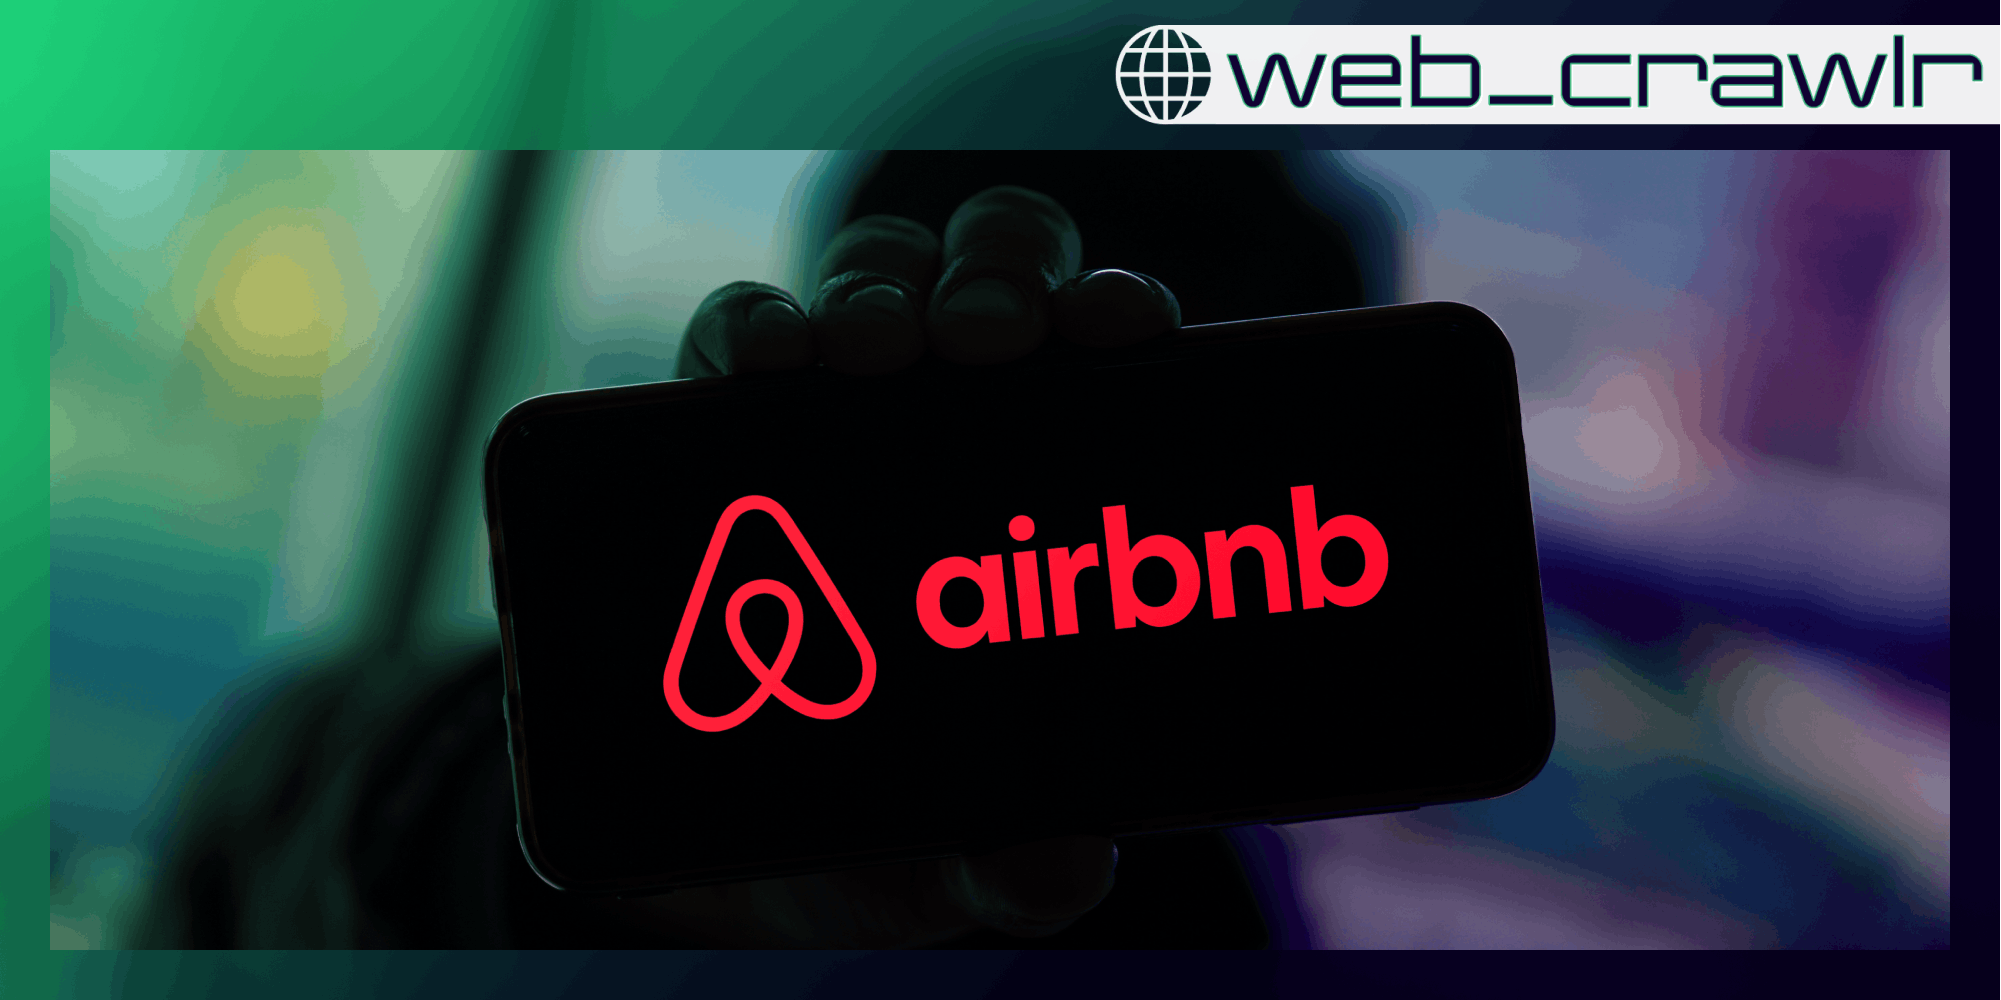 A person holding a phone with the Airbnb logo on it. The Daily Dot newsletter web_crawlr logo is in the top right corner.